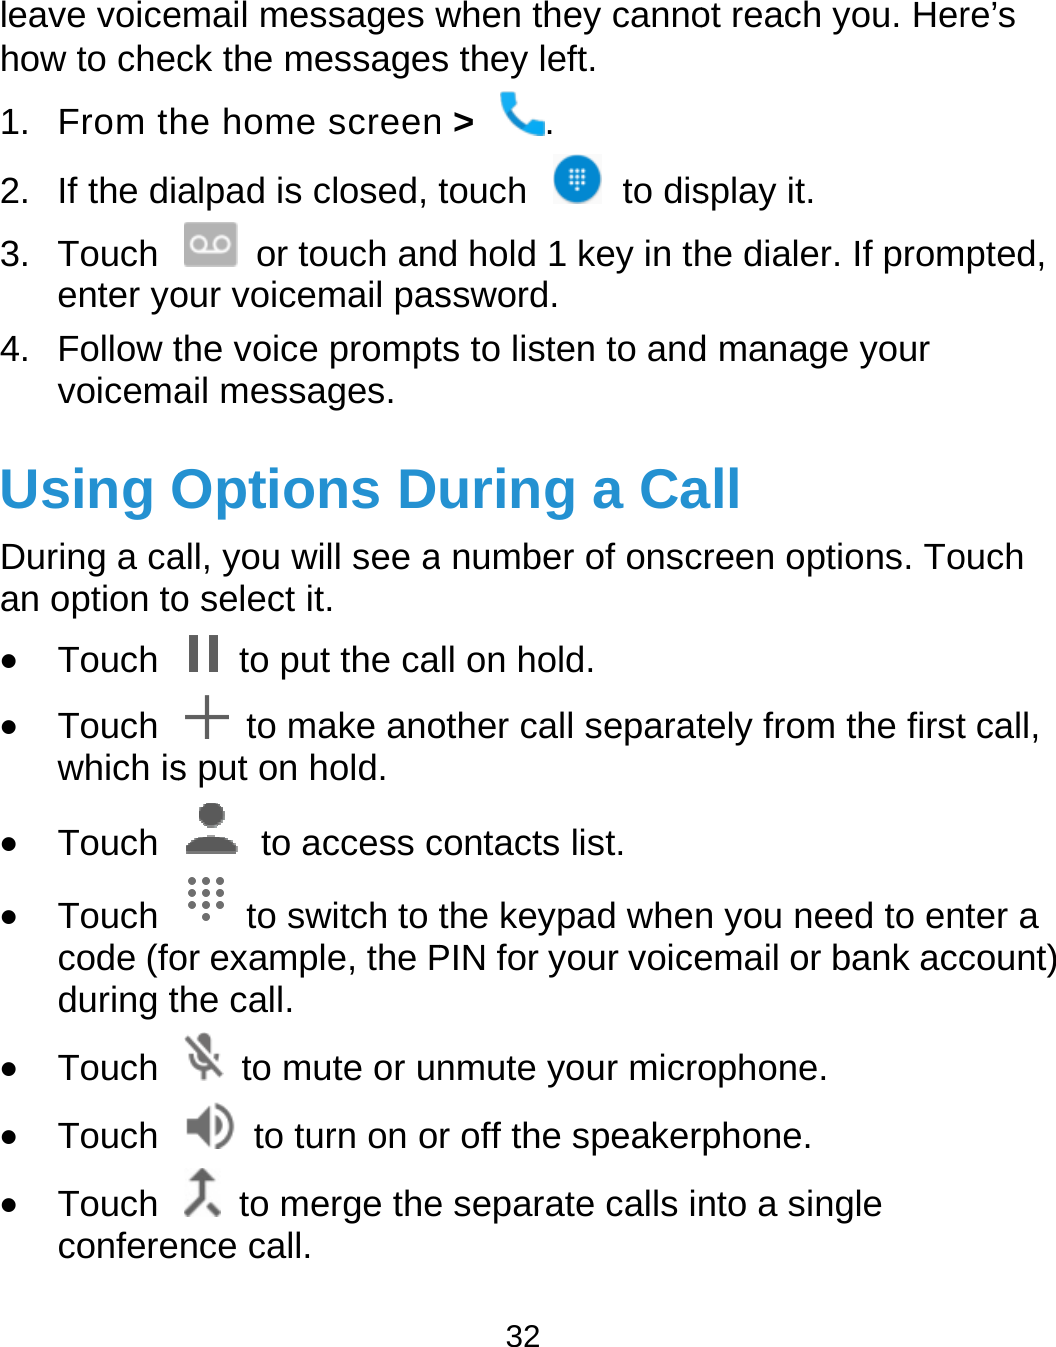  leave voicehow to chec1. From th2.  If the di3. Touch enter yo4. Follow tvoicemaUsing ODuring a caan option to Touch  Touch which is Touch  Touch code (foduring t Touch  Touch  Touch confereemail messages wck the messageshe home screenalpad is closed, t or touch andour voicemail pasthe voice promptail messages. Options Dall, you will see ao select it.   to put the ca  to make anos put on hold.  to access c to switch to tor example, the Phe call.   to mute or un  to turn on o to merge thence call. 32 when they cannos they left. n &gt;  . touch  to disd hold 1 key in thssword.   ts to listen to anduring a Ca number of onscll on hold. other call separatcontacts list. the keypad whenPIN for your voicenmute your micror off the speakere separate calls inot reach you. Hersplay it. he dialer. If promd manage your all creen options. Totely from the firstn you need to enemail or bank accophone. rphone. nto a single re’s mpted, ouch t call, nter a count) 